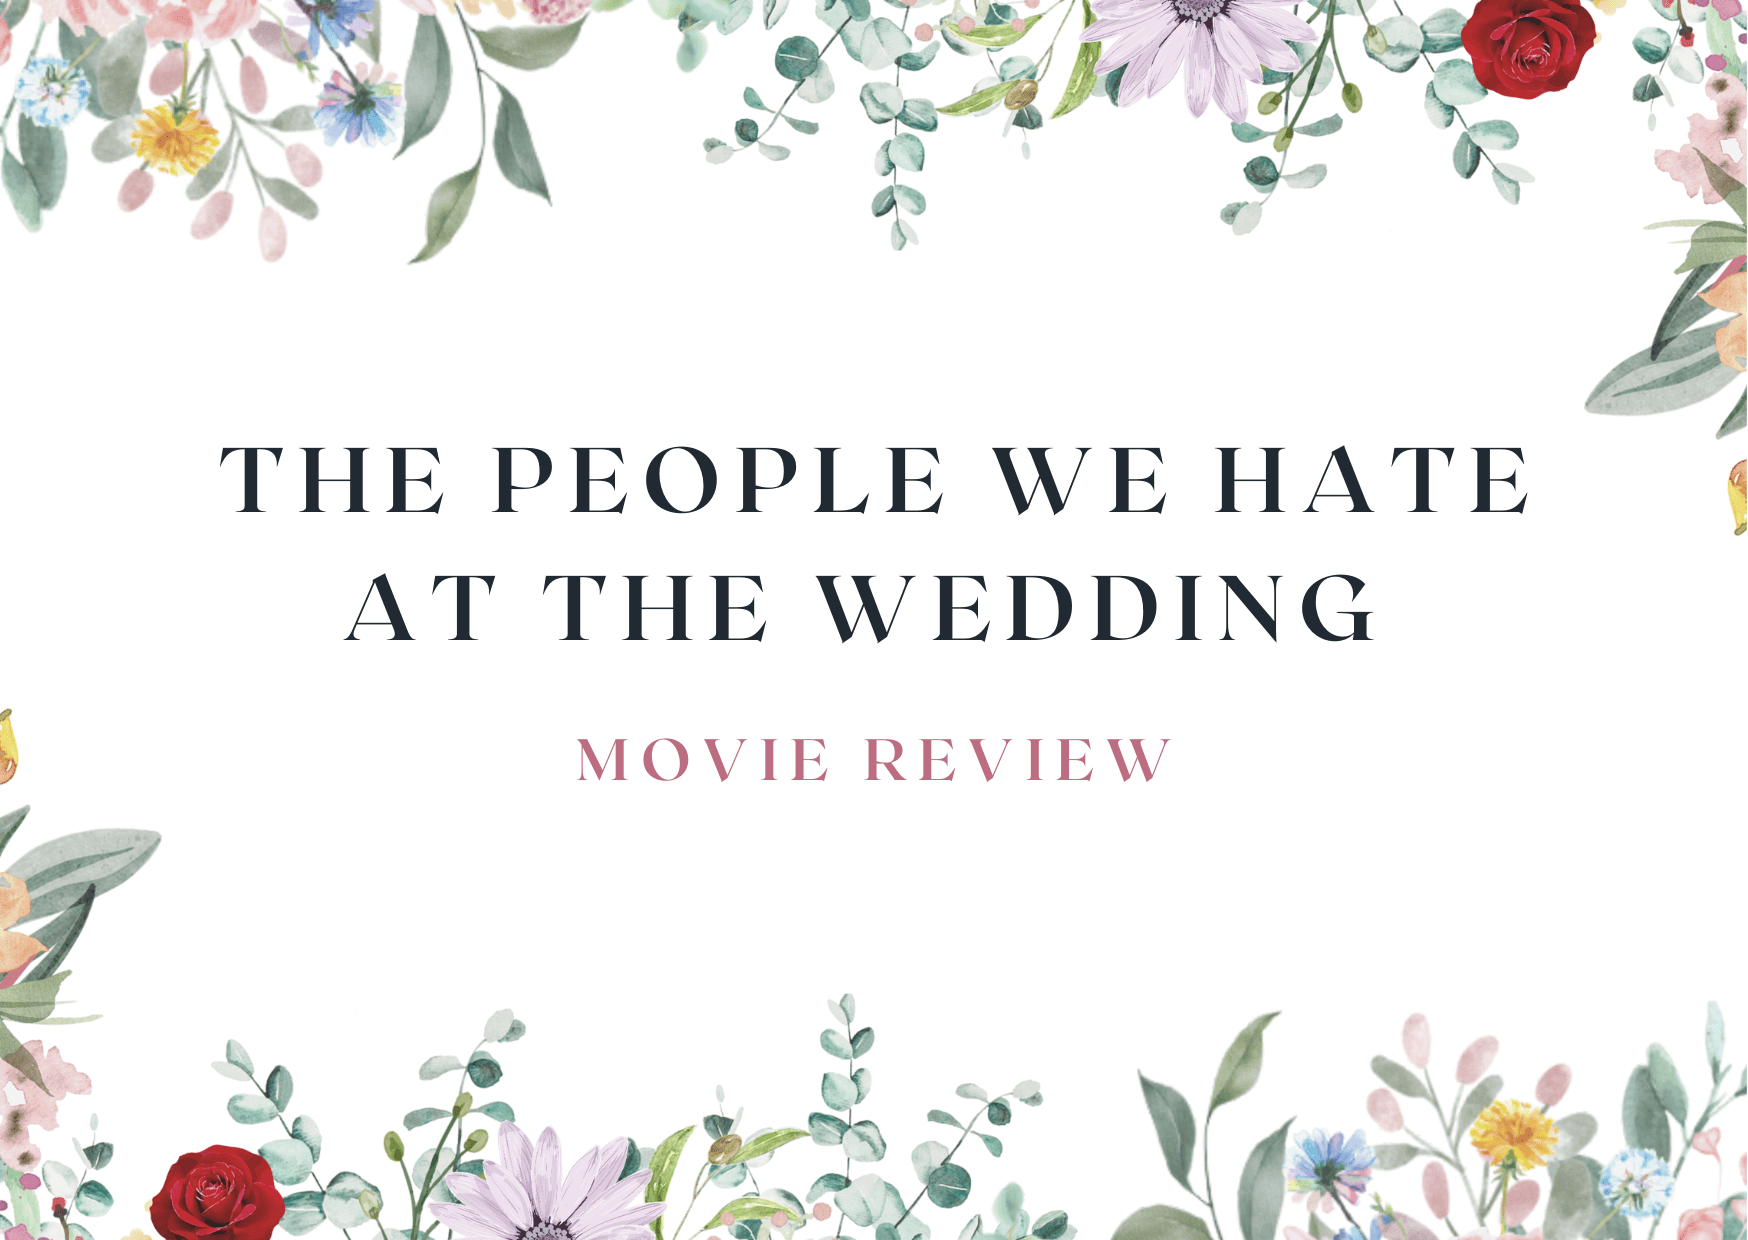 https://howruecsit.com/wp-content/uploads/2022/11/The-People-We-Hate-at-the-Wedding-2.png?v=1687100032